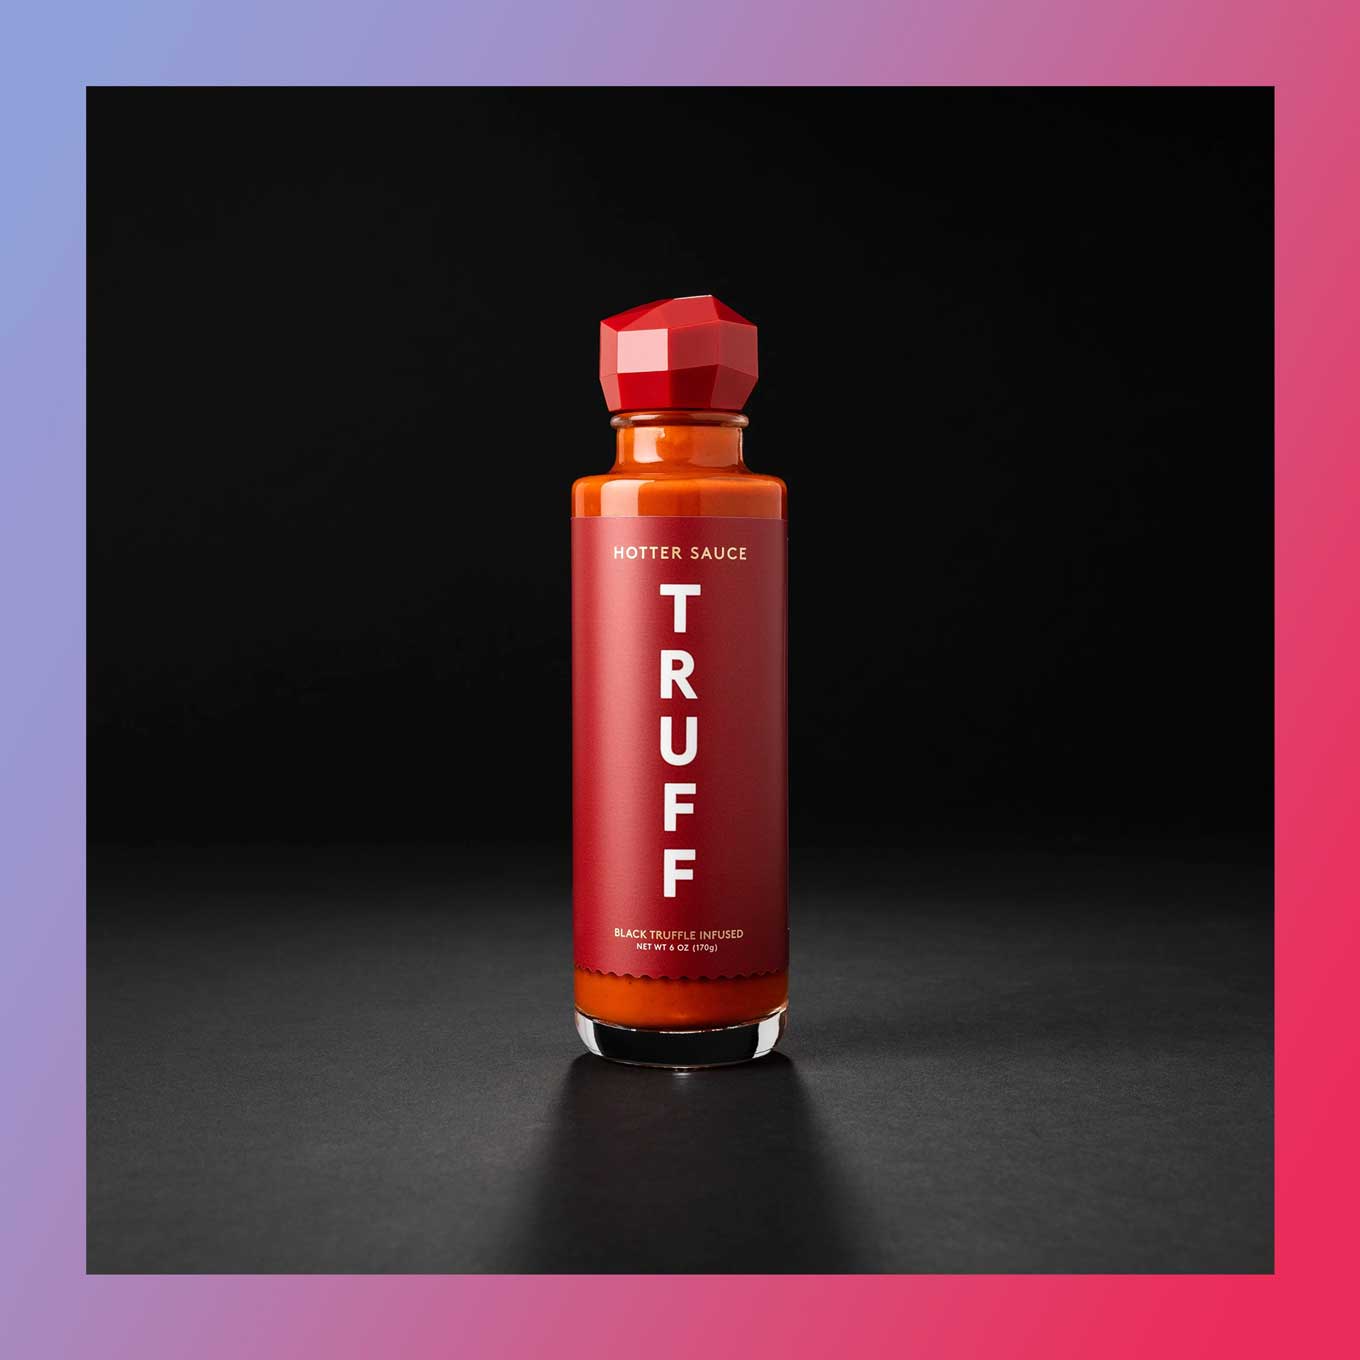 Tall bottle of hot sauce that says TRUFF